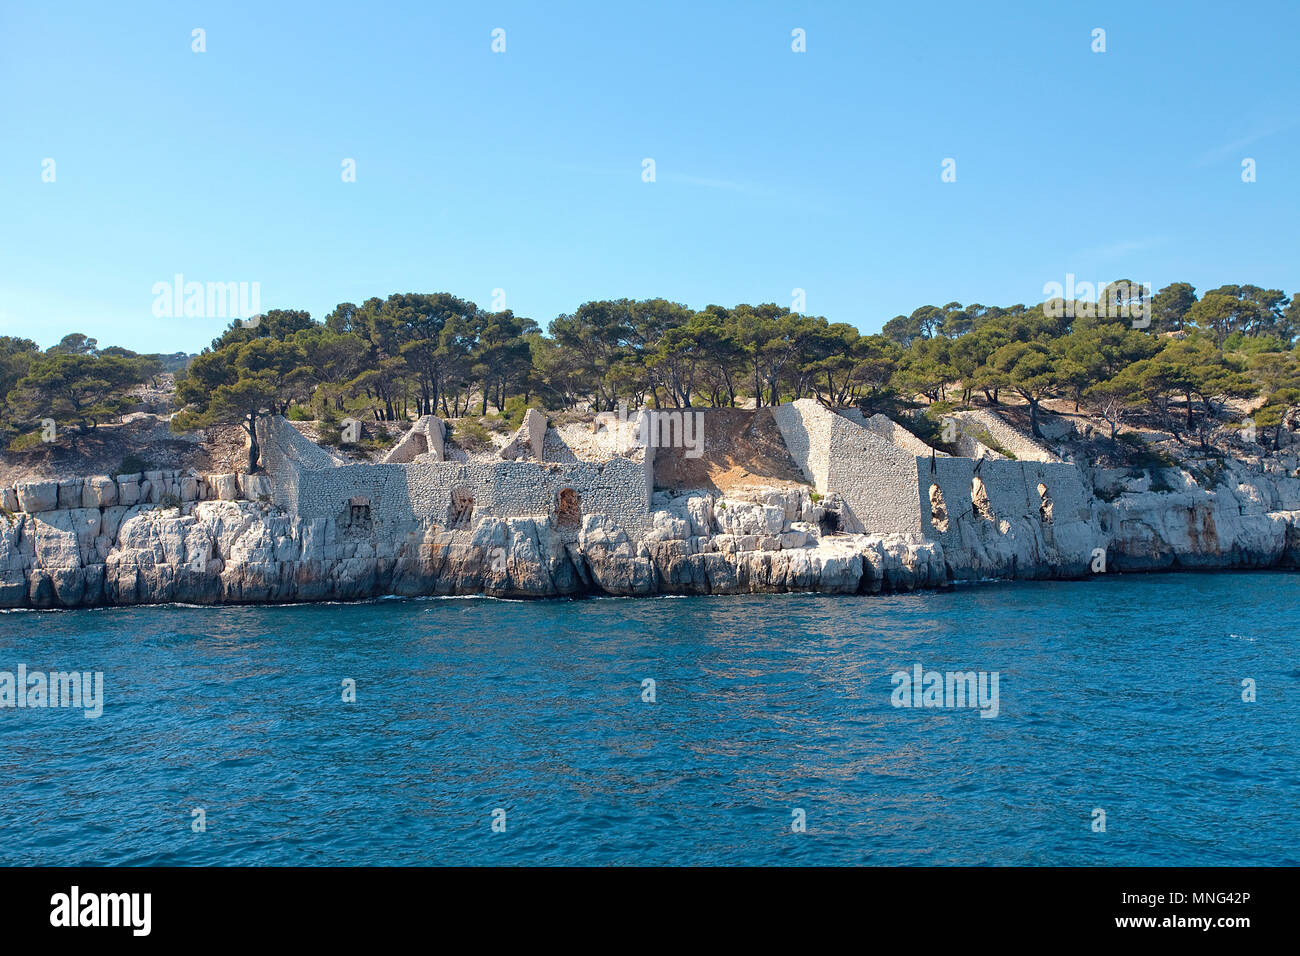 Ruins of former lime kilns at Calanques, Bouches-du-Rhone, Côte d’Azur, South France, France, Europe Stock Photo